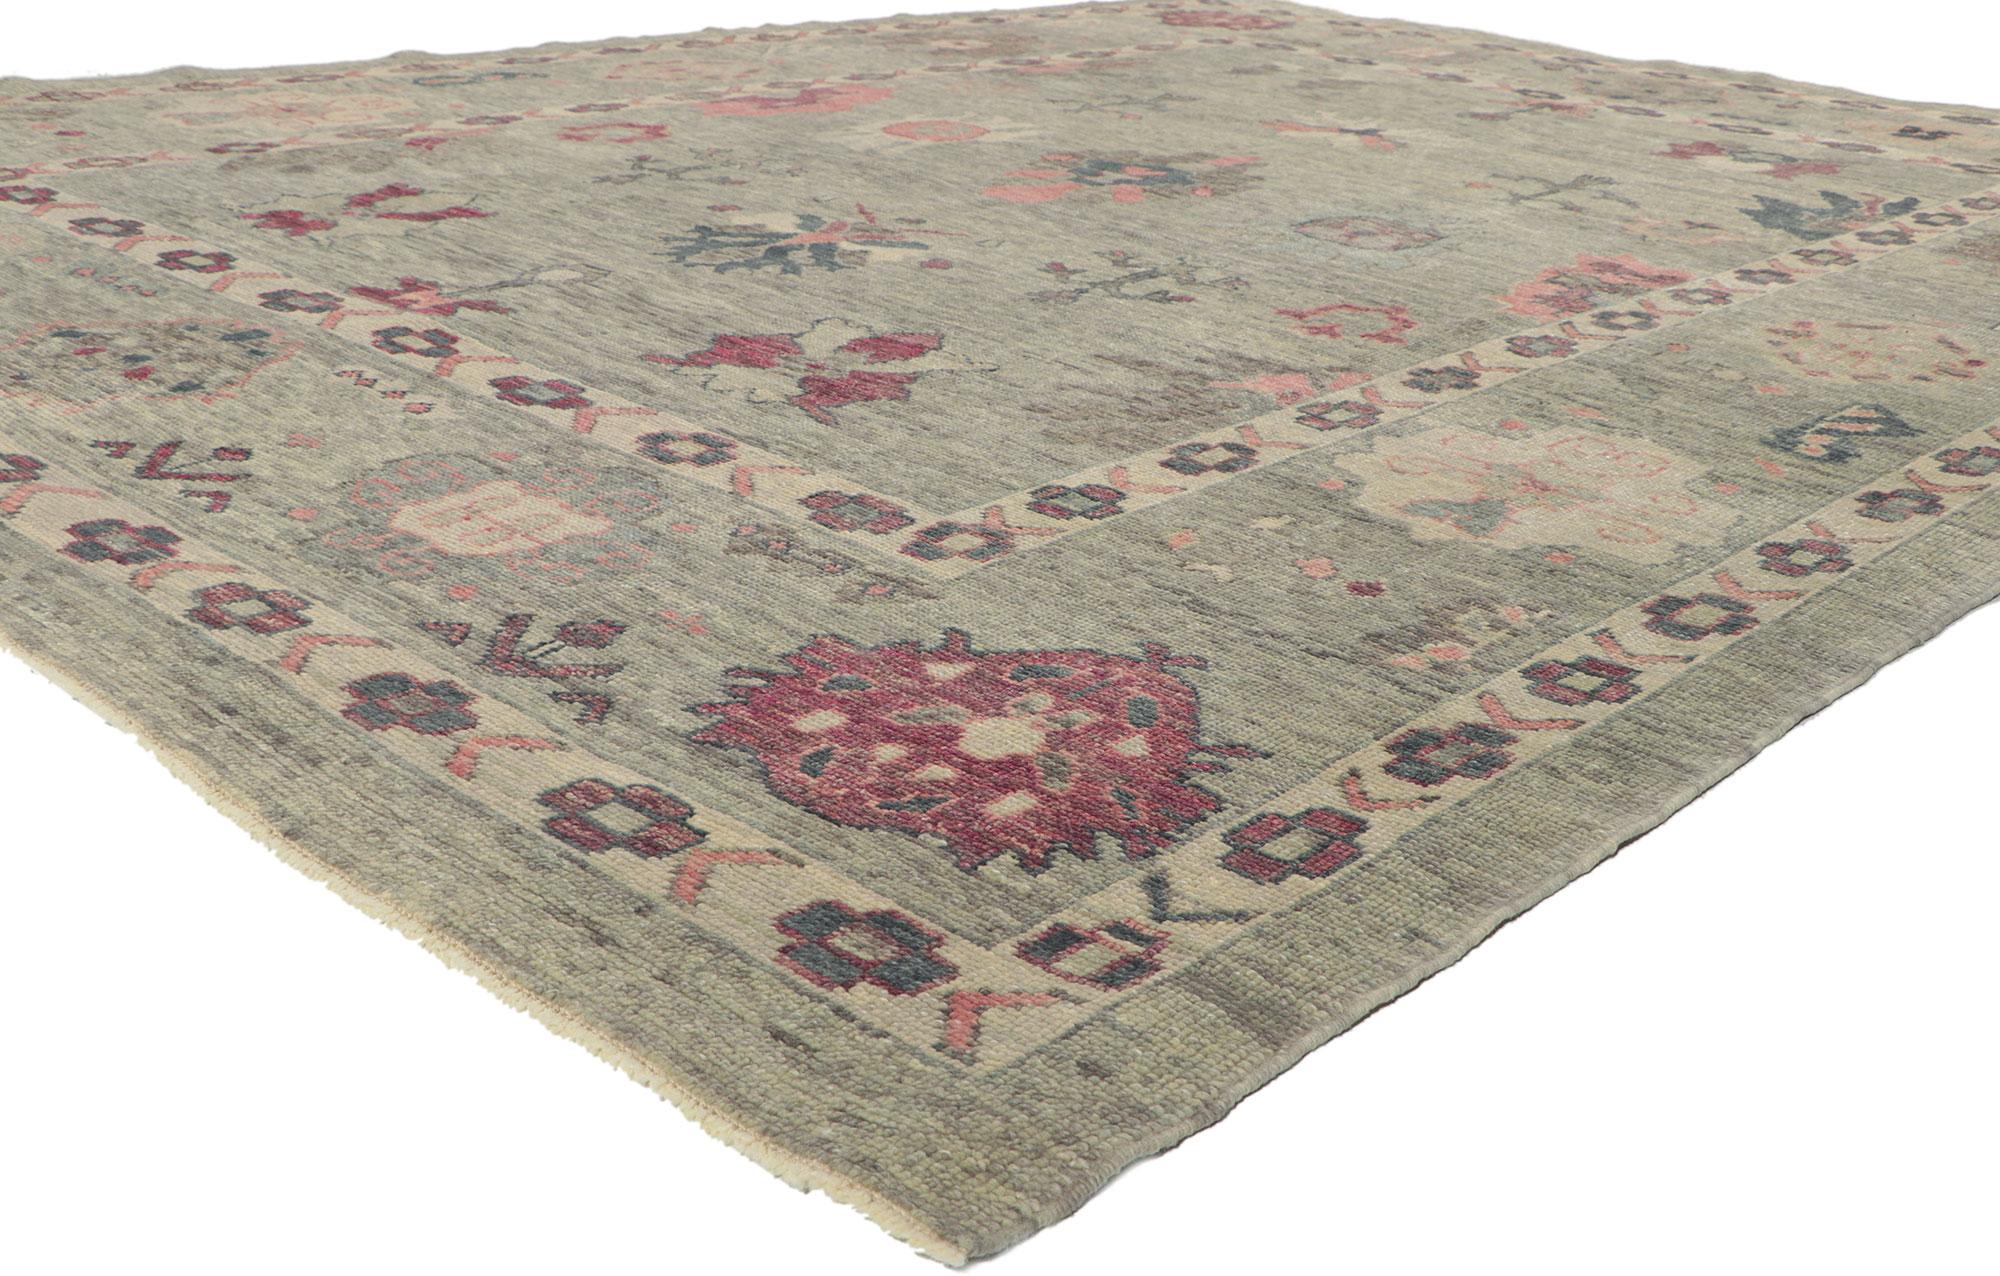 ?53863 new colorful Turkish oushak rug, 09'02 x 12'03.
With its modern style, incredible detail and texture, this hand knotted wool Turkish Oushak rug is a captivating vision of woven beauty. The eye-catching botanical design and luxurious color